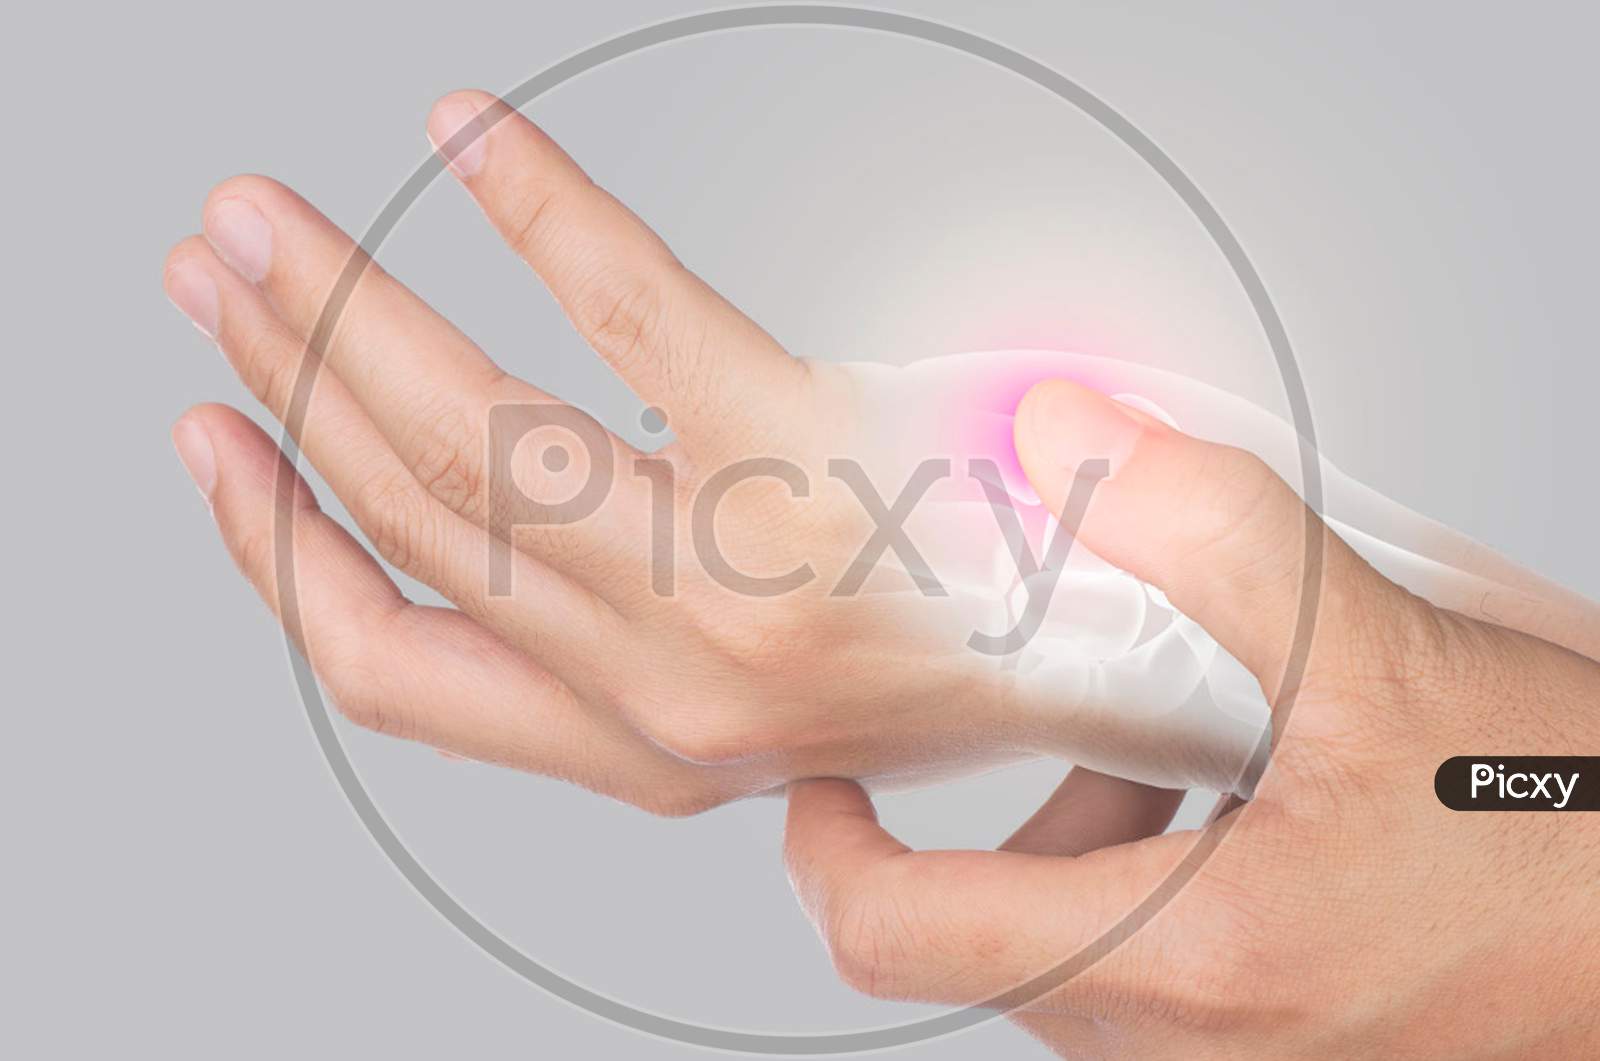 muscle hand pain from office syndrome in gray background